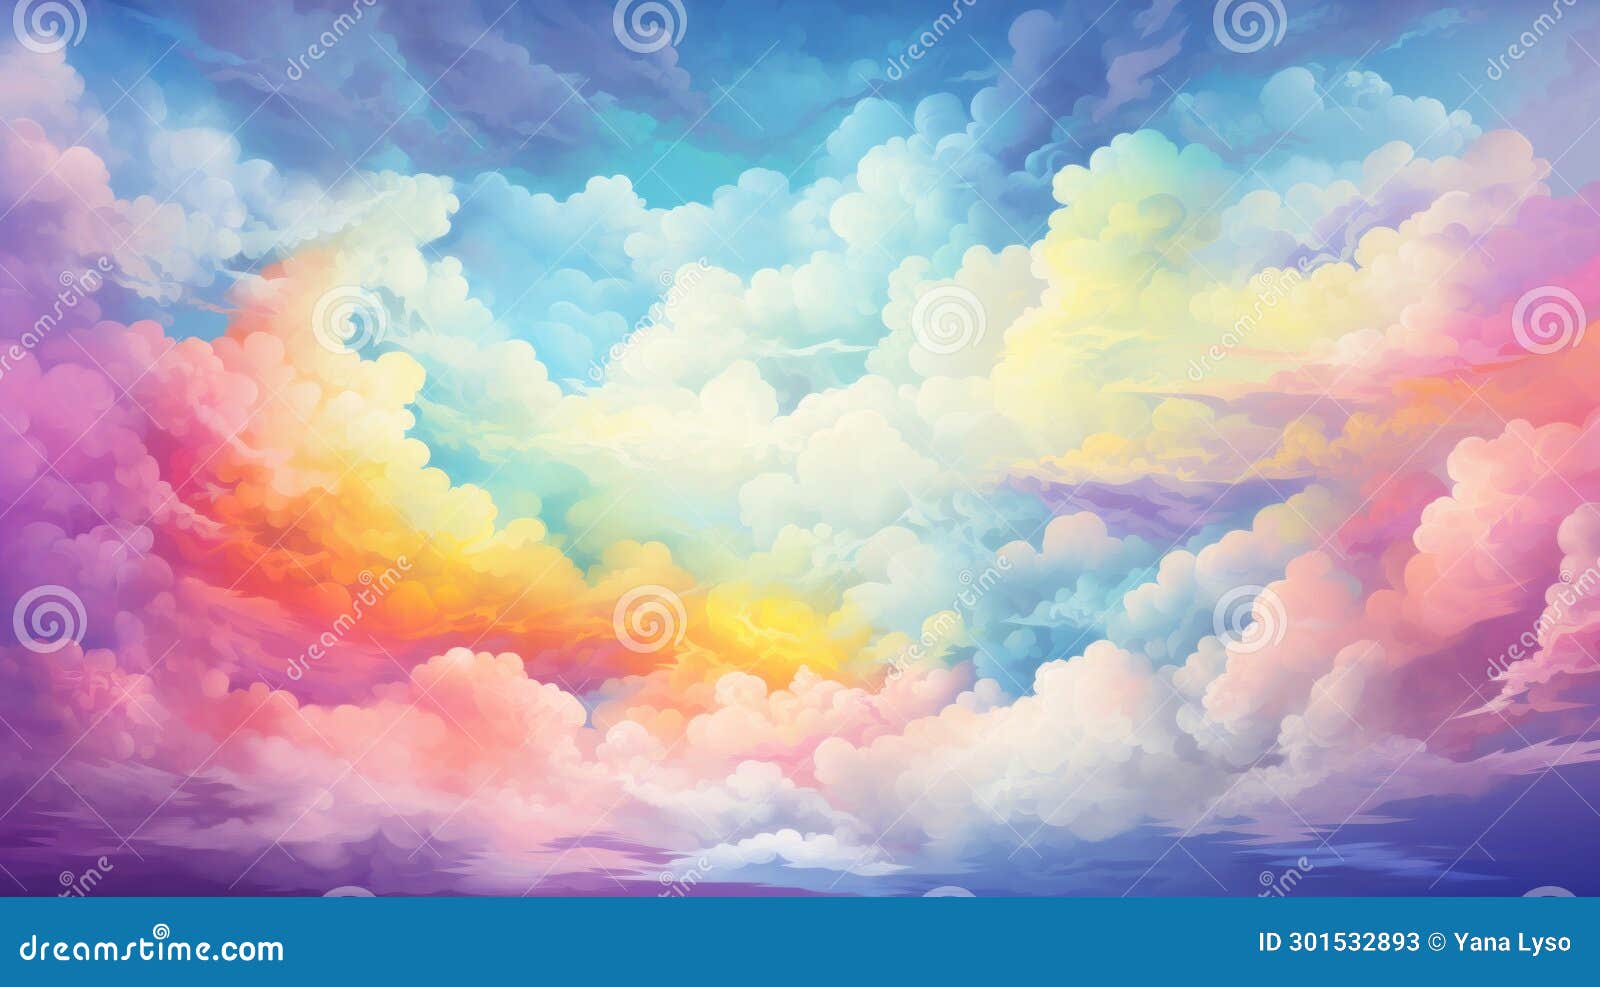 https://thumbs.dreamstime.com/z/rainbow-clouds-pastel-colors-illustration-style-oil-painting-abstract-beautiful-sky-background-copy-space-ideal-creative-301532893.jpg